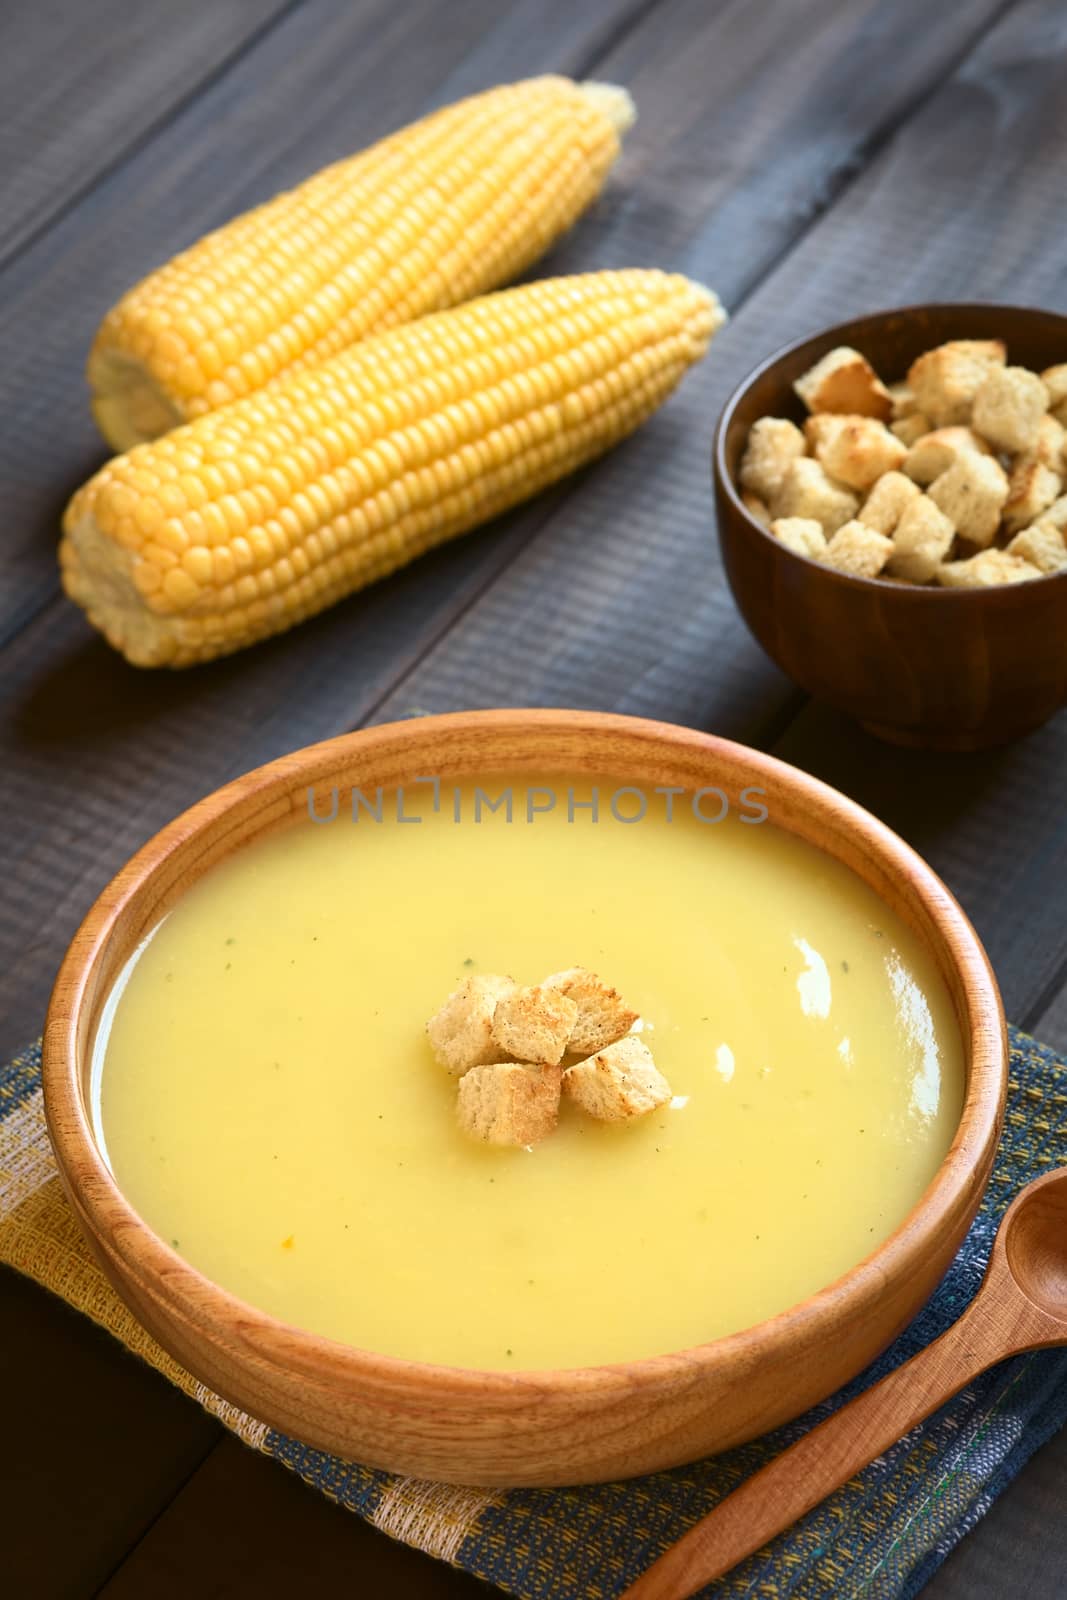 Cream of corn soup in wooden bowl with croutons on top, photographed on dark wood with natural light (Selective Focus, Focus on the front of the croutons on the soup)